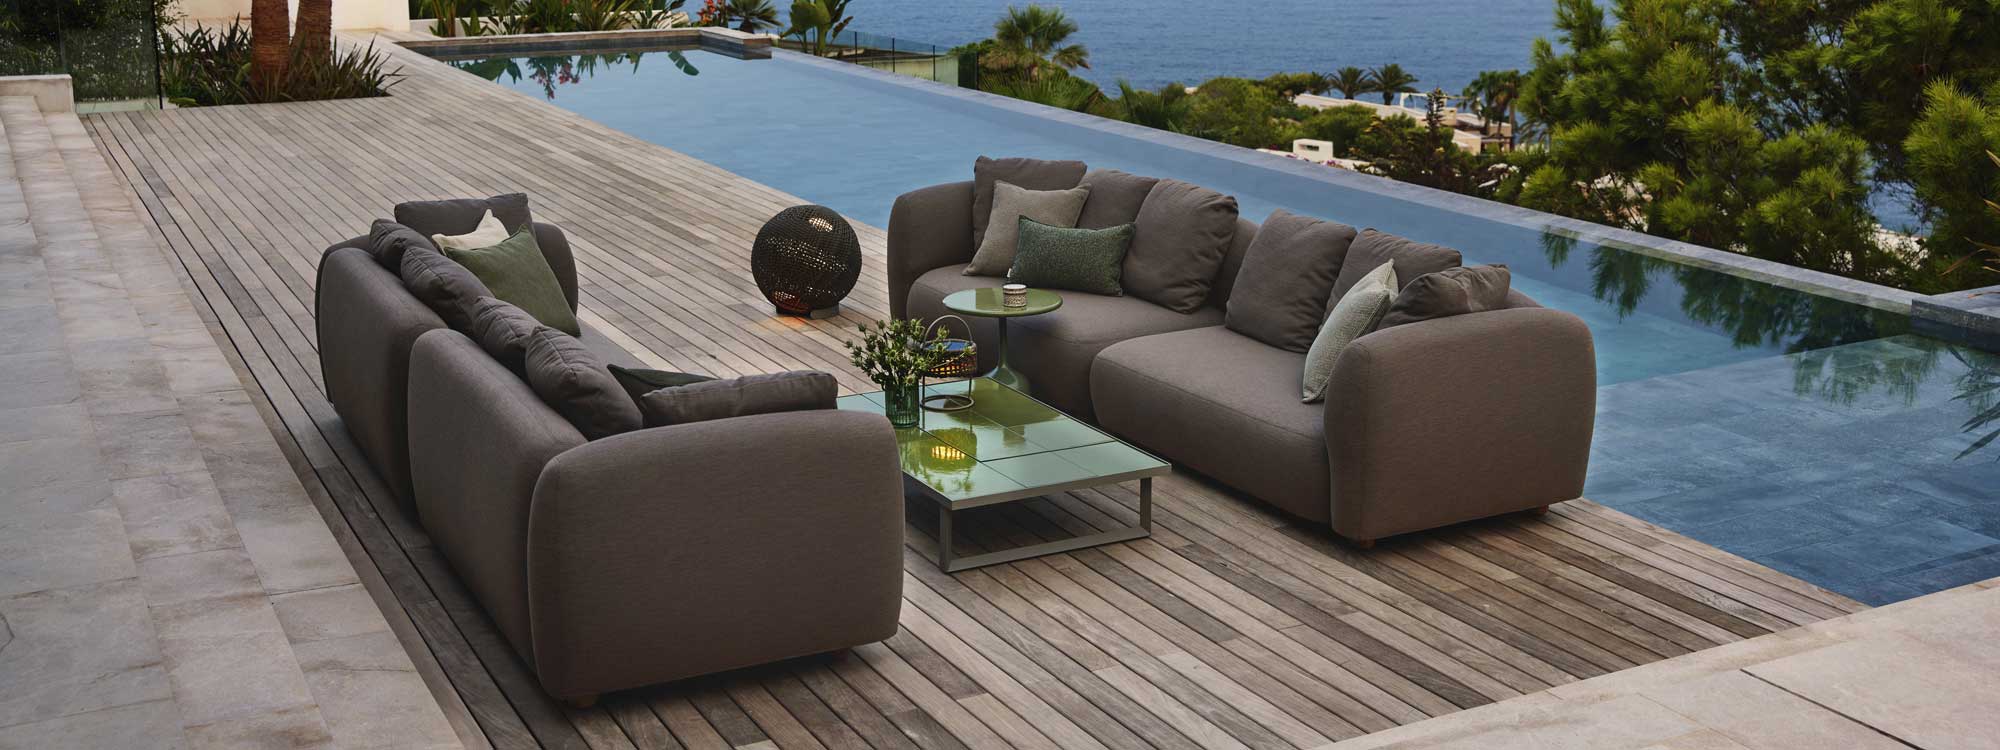 Image of 2 Capture linear garden sofas with Glaze glazed lava stone coffee table by Cane-line in the centre